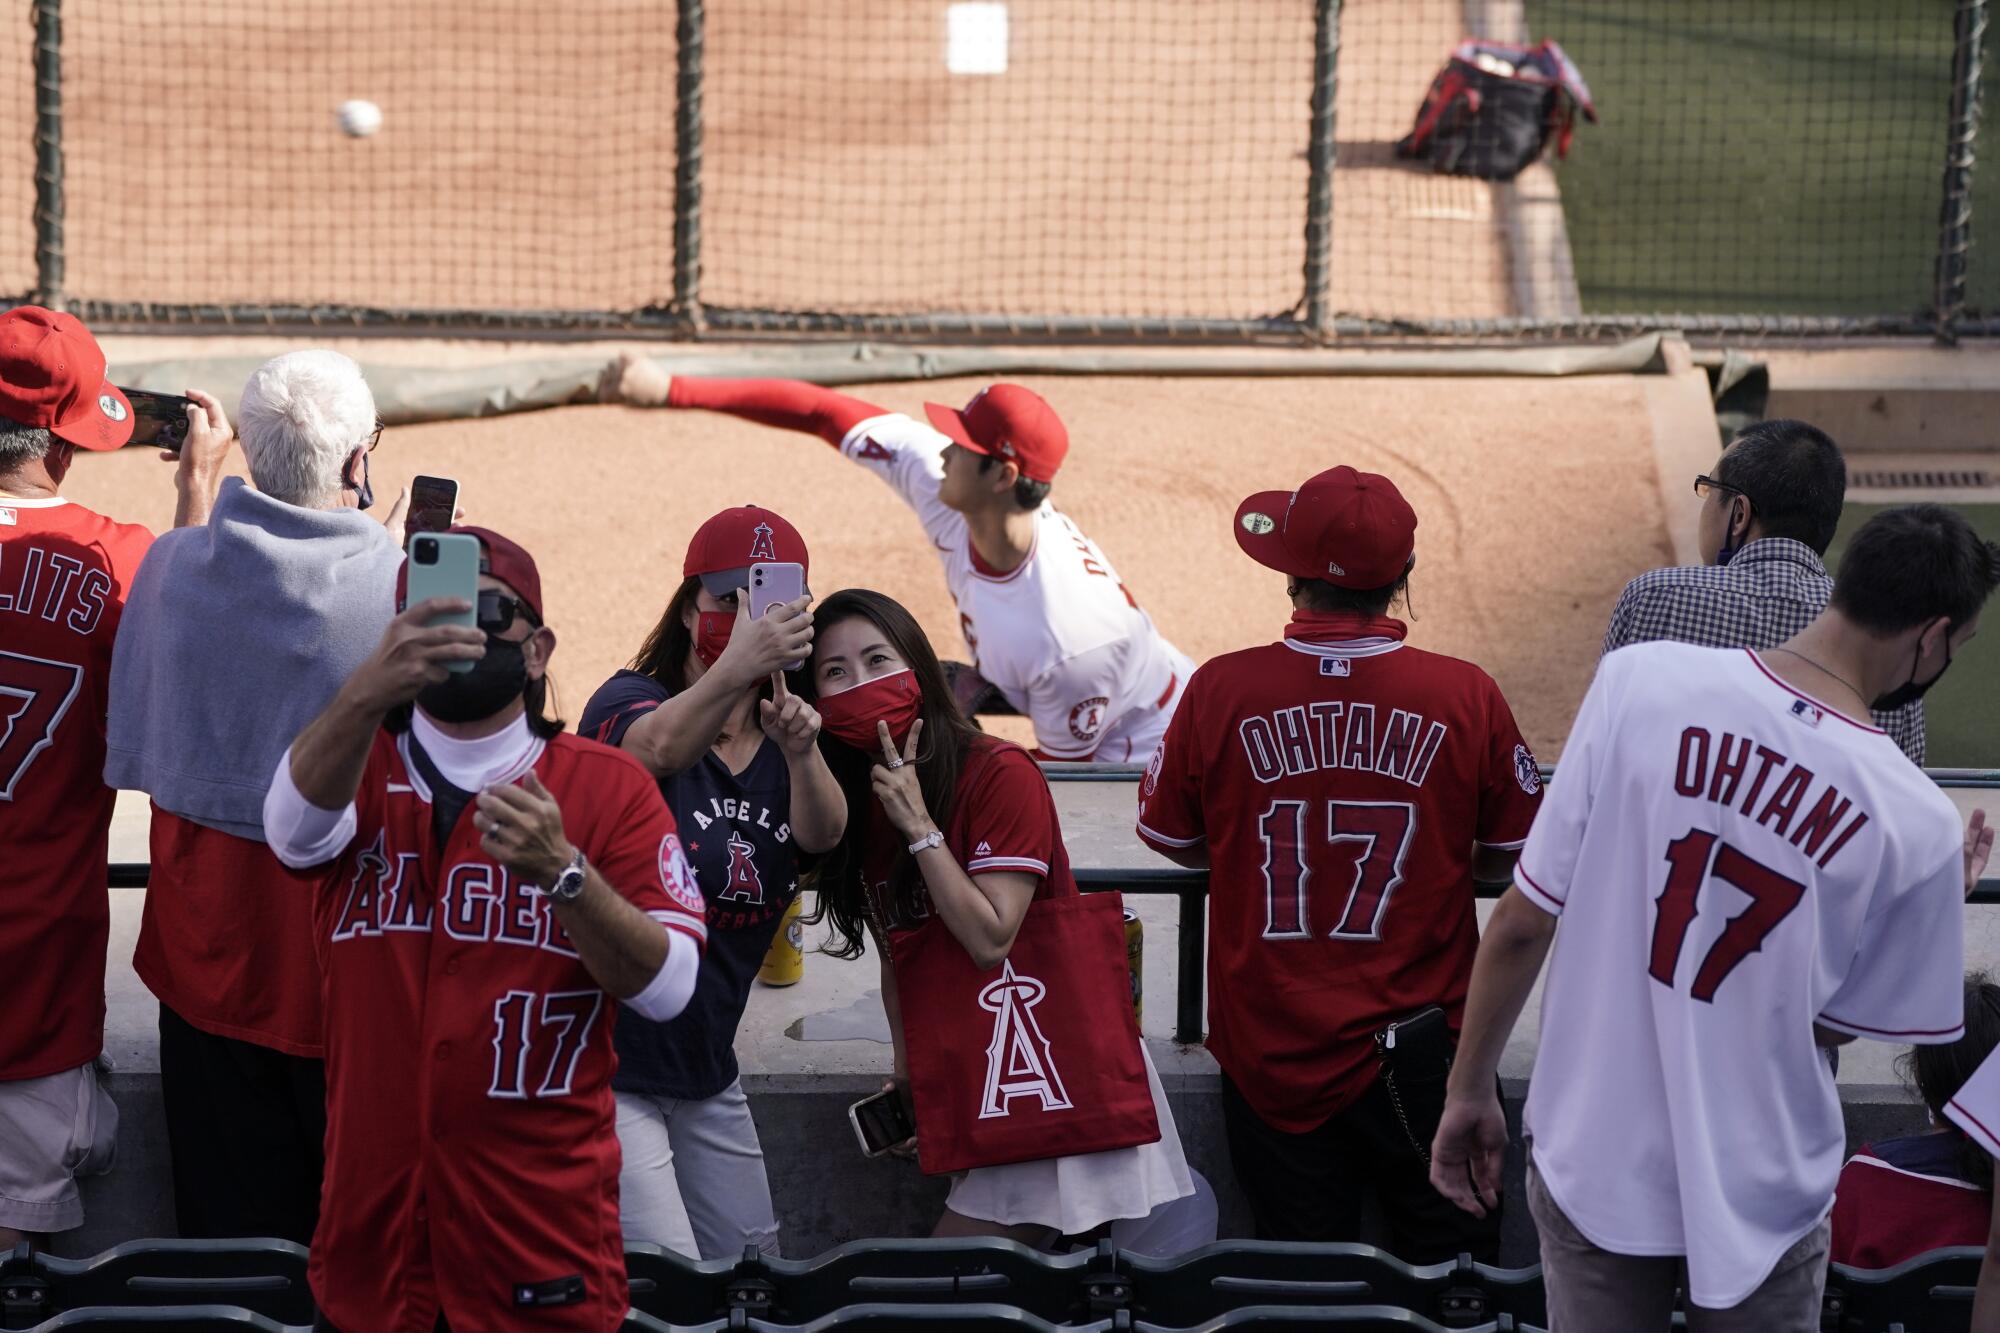 Fans take a selfie as Angels starting pitcher Shohei Ohtani warms up in the bullpen behind them.